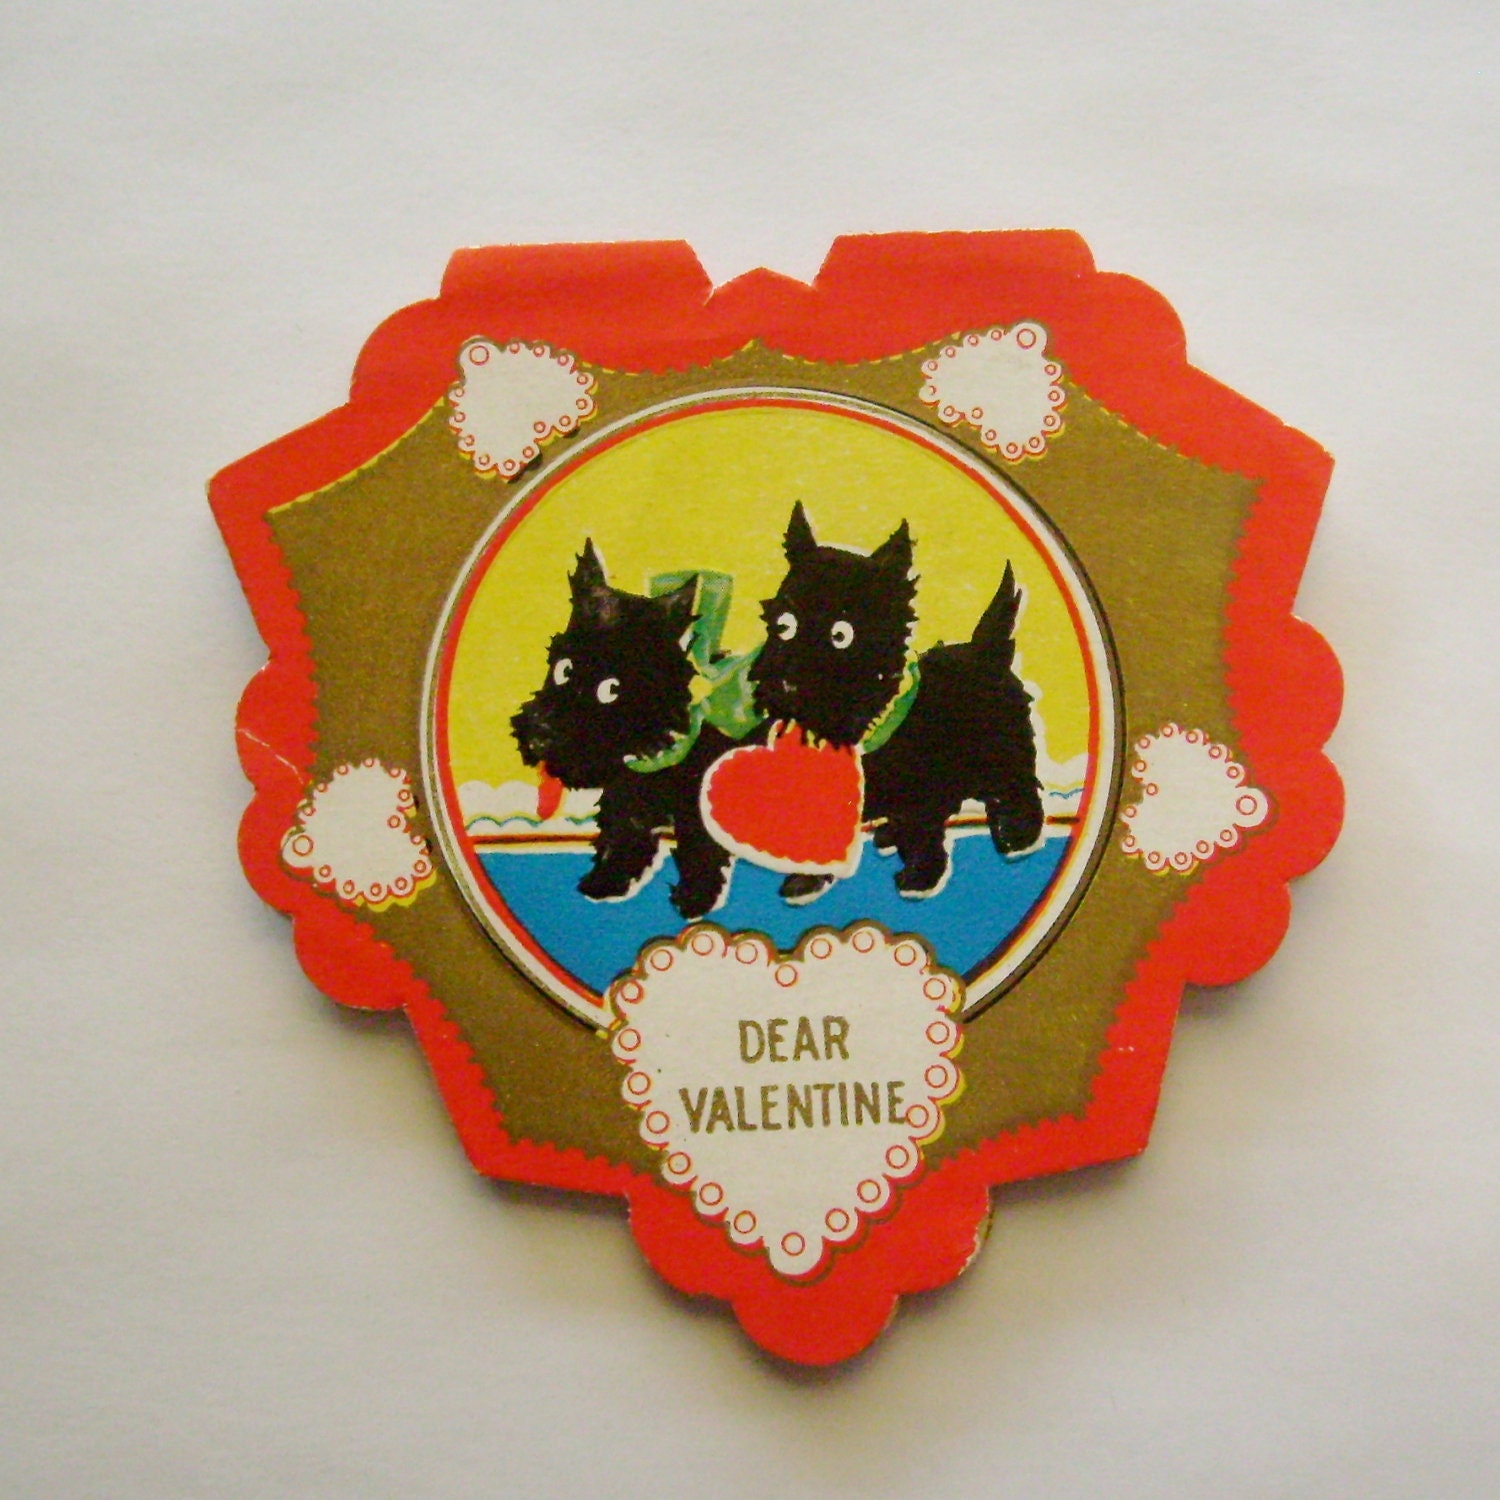 Vintage Valentine's Day Card heart shaped scotty dogs